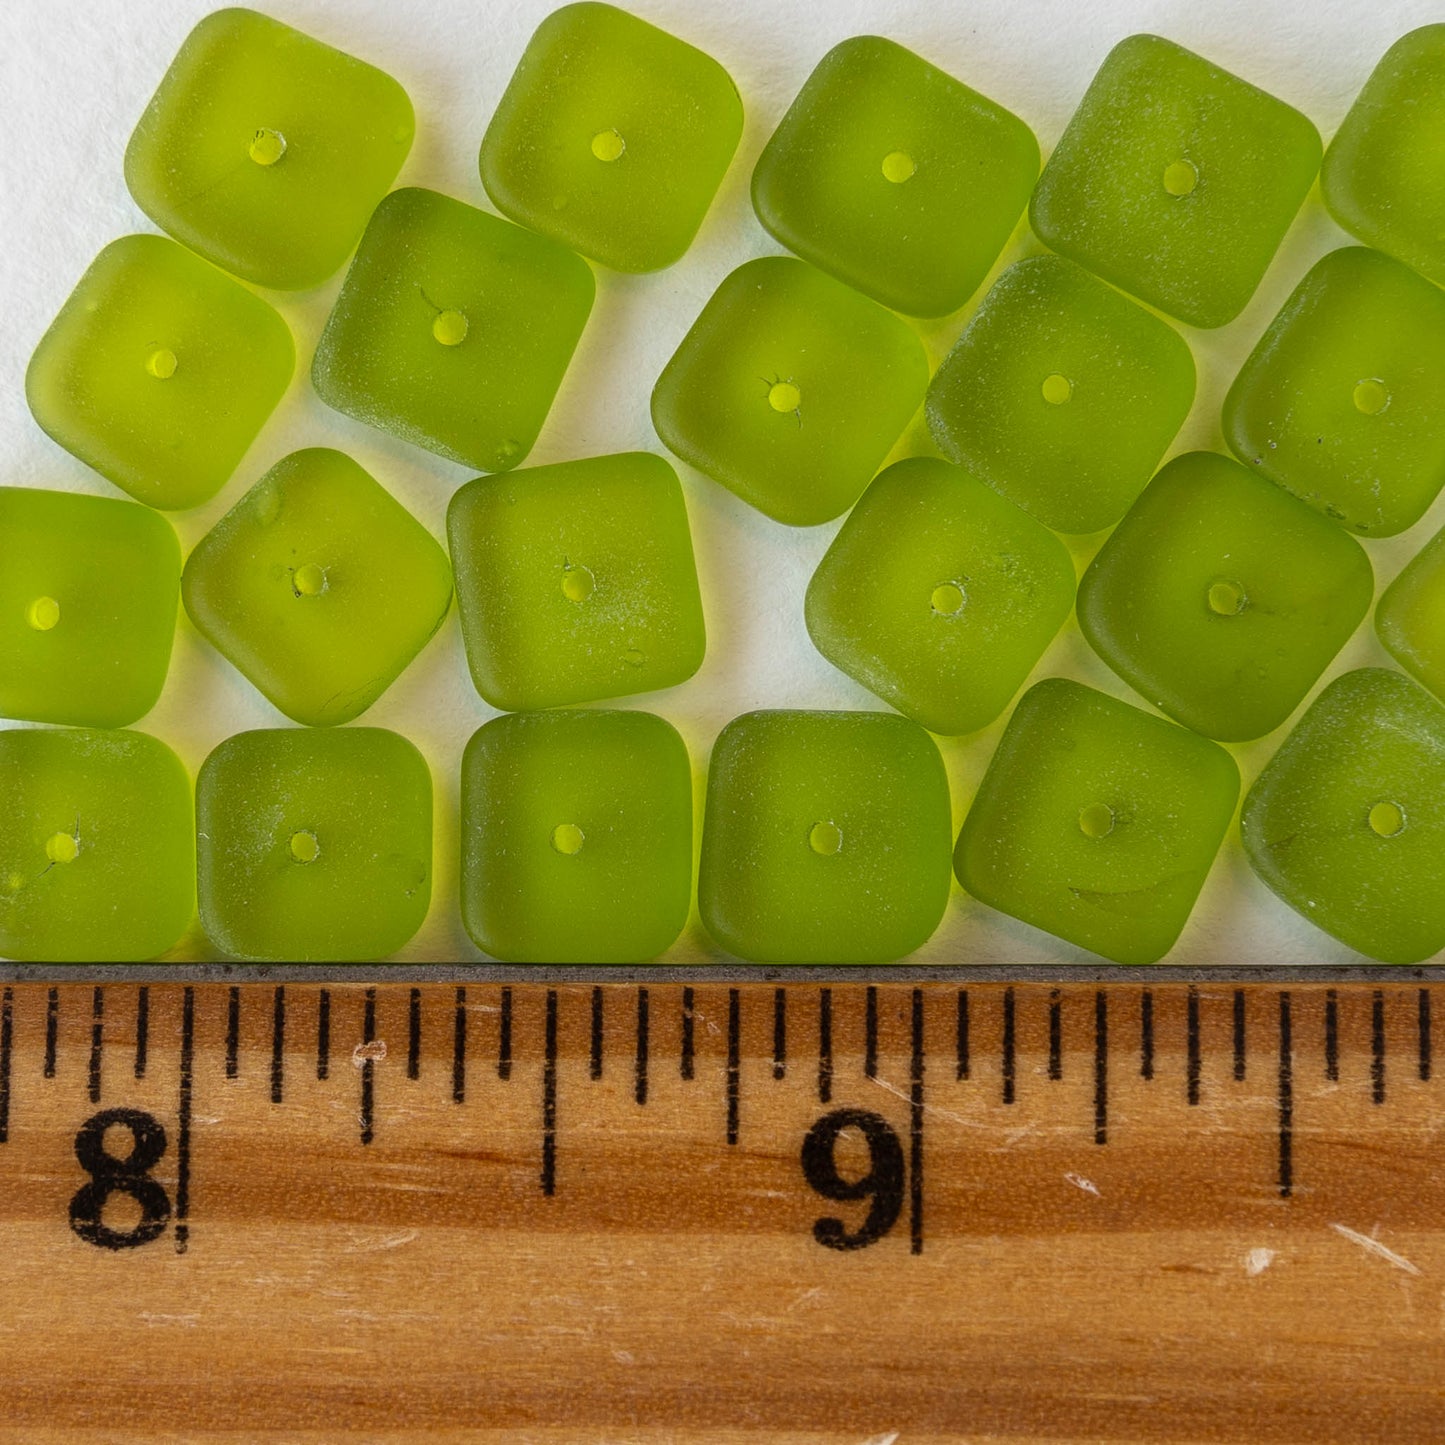 9mm Square Heishi Beads - Lime Green - 25 Beads